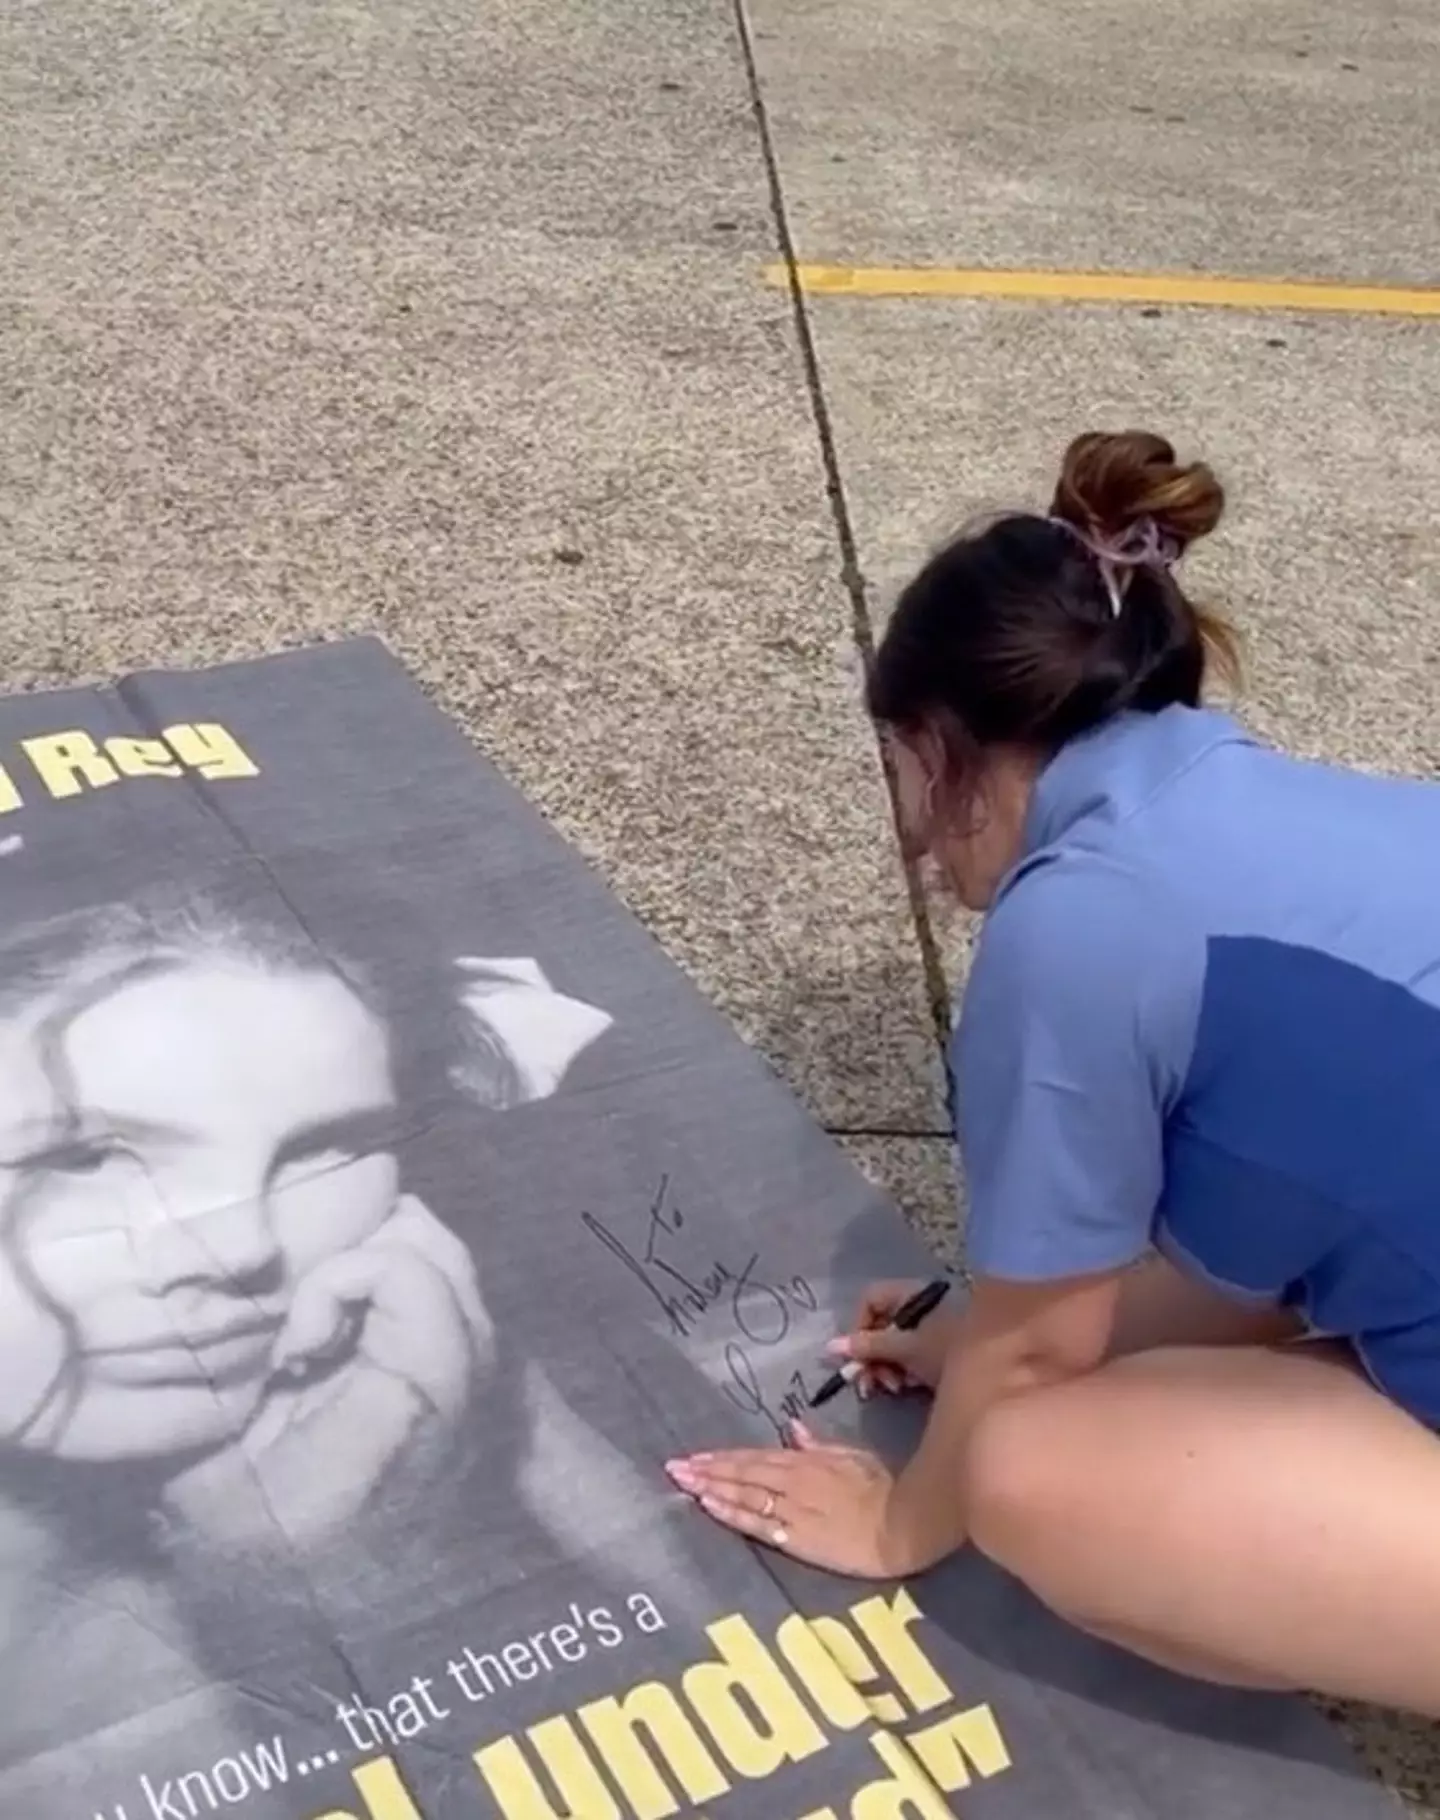 The singer signed a fan's poster.